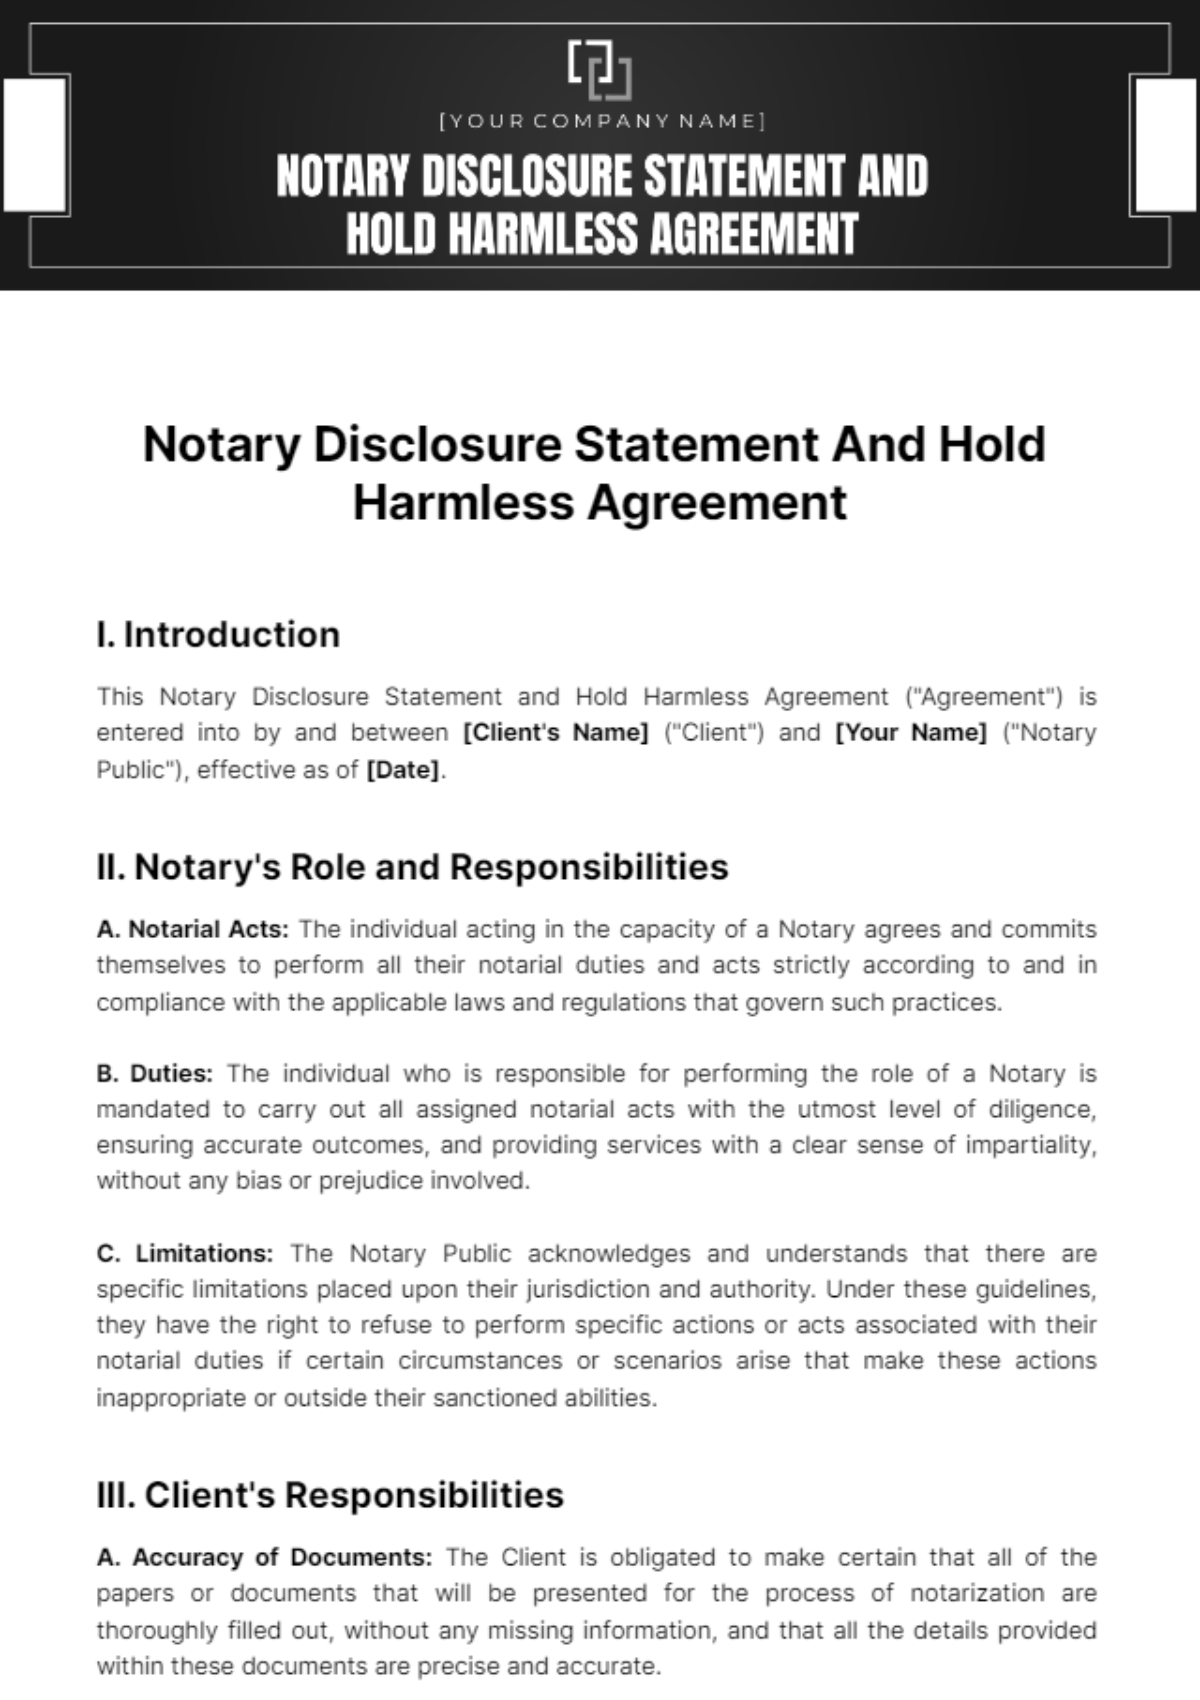 Notary Disclosure Statement And Hold Harmless Agreement Template